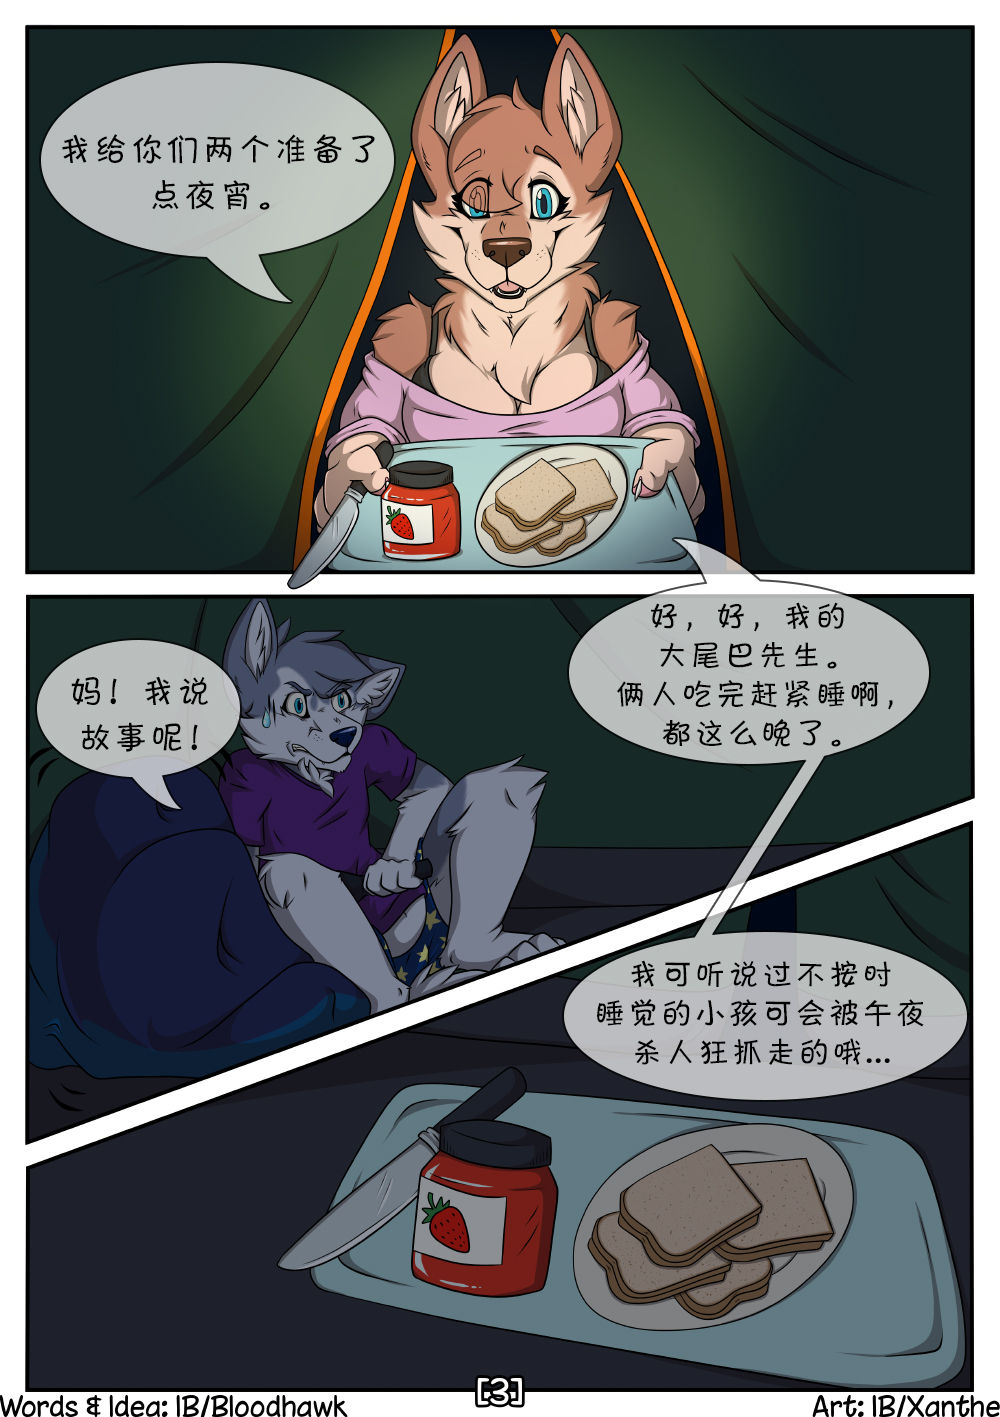 [Xanthe] Max's campout | 马克斯的外出野营 (ongoing) [Chinese]305寝个人汉化 